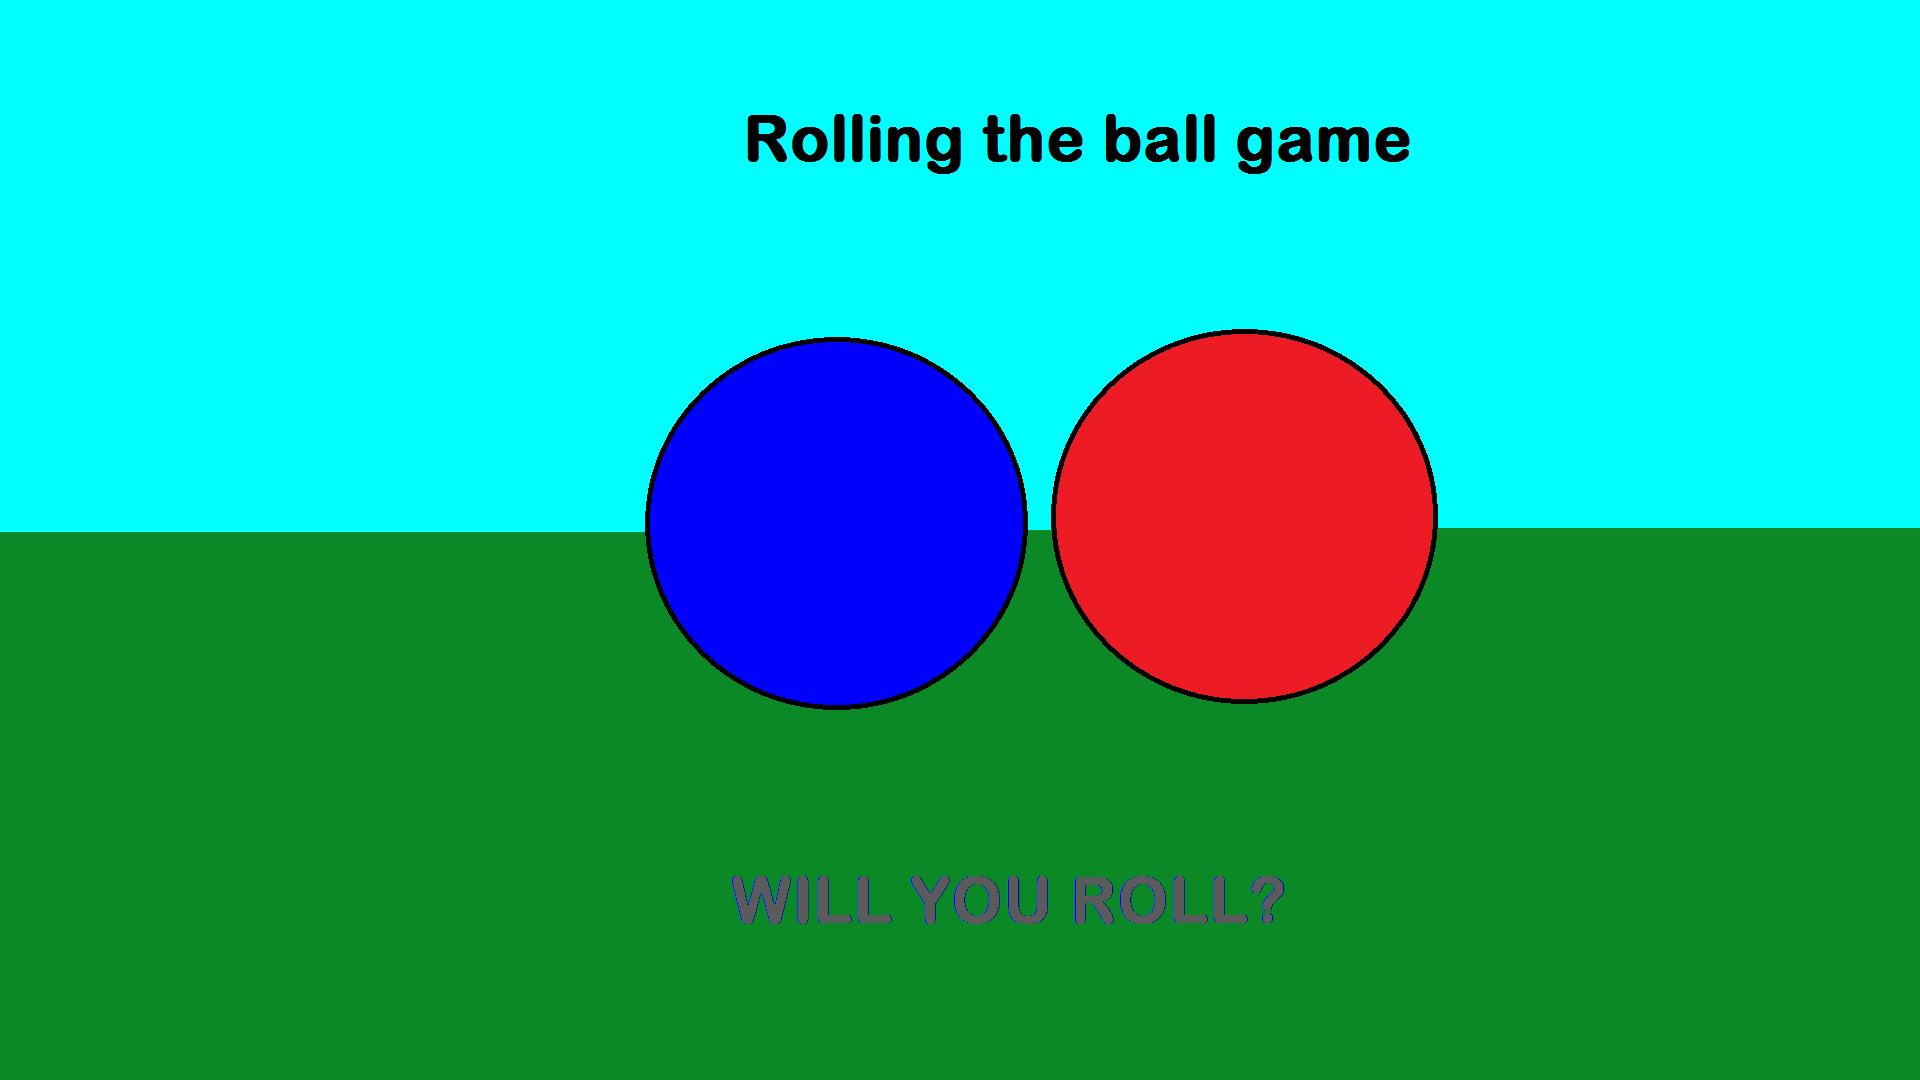 Rolling the ball game